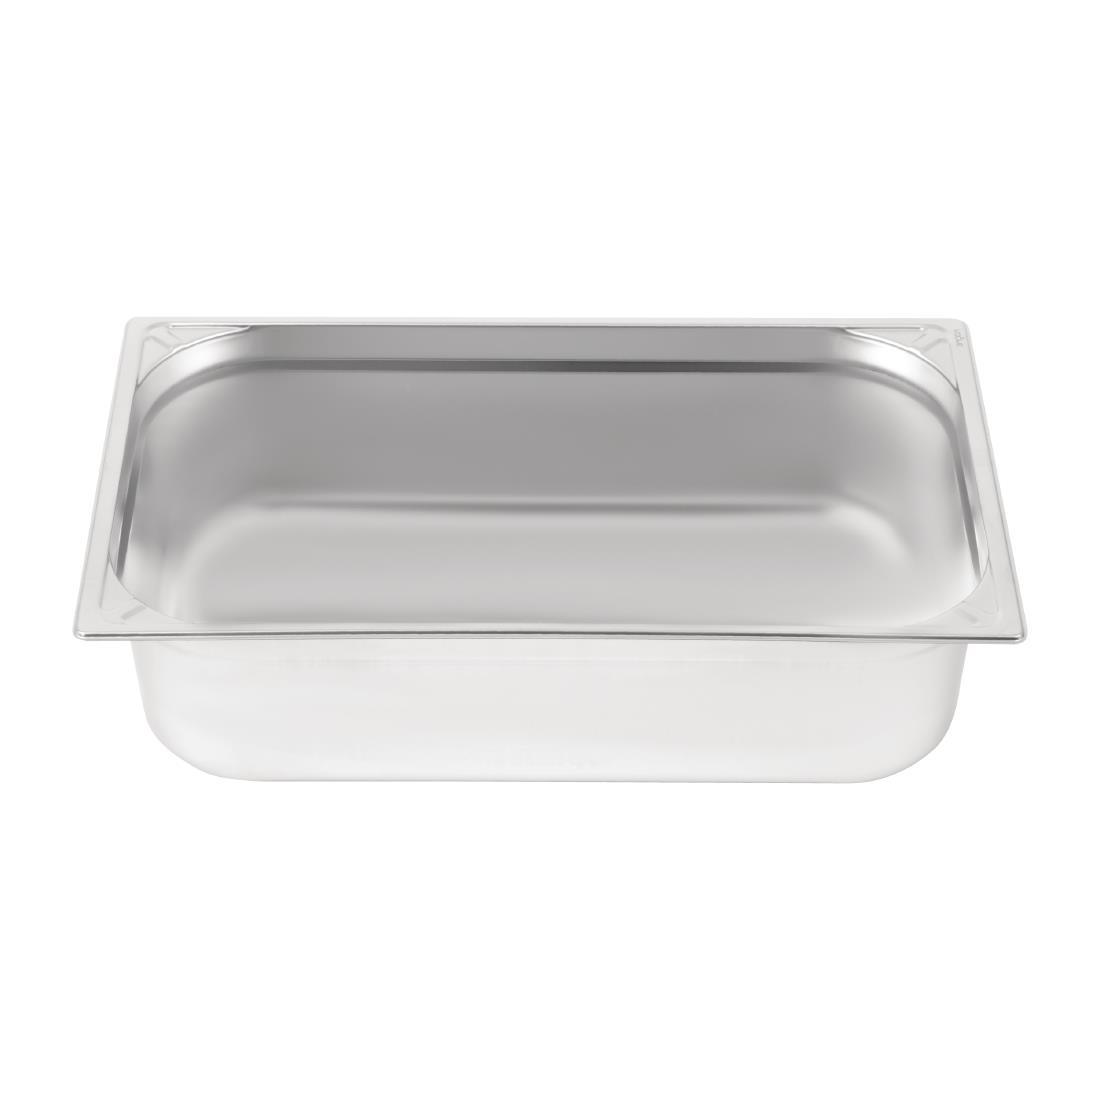 Vogue Heavy Duty Stainless Steel 1/1 Gastronorm Pan 150mm - DW435  - 2